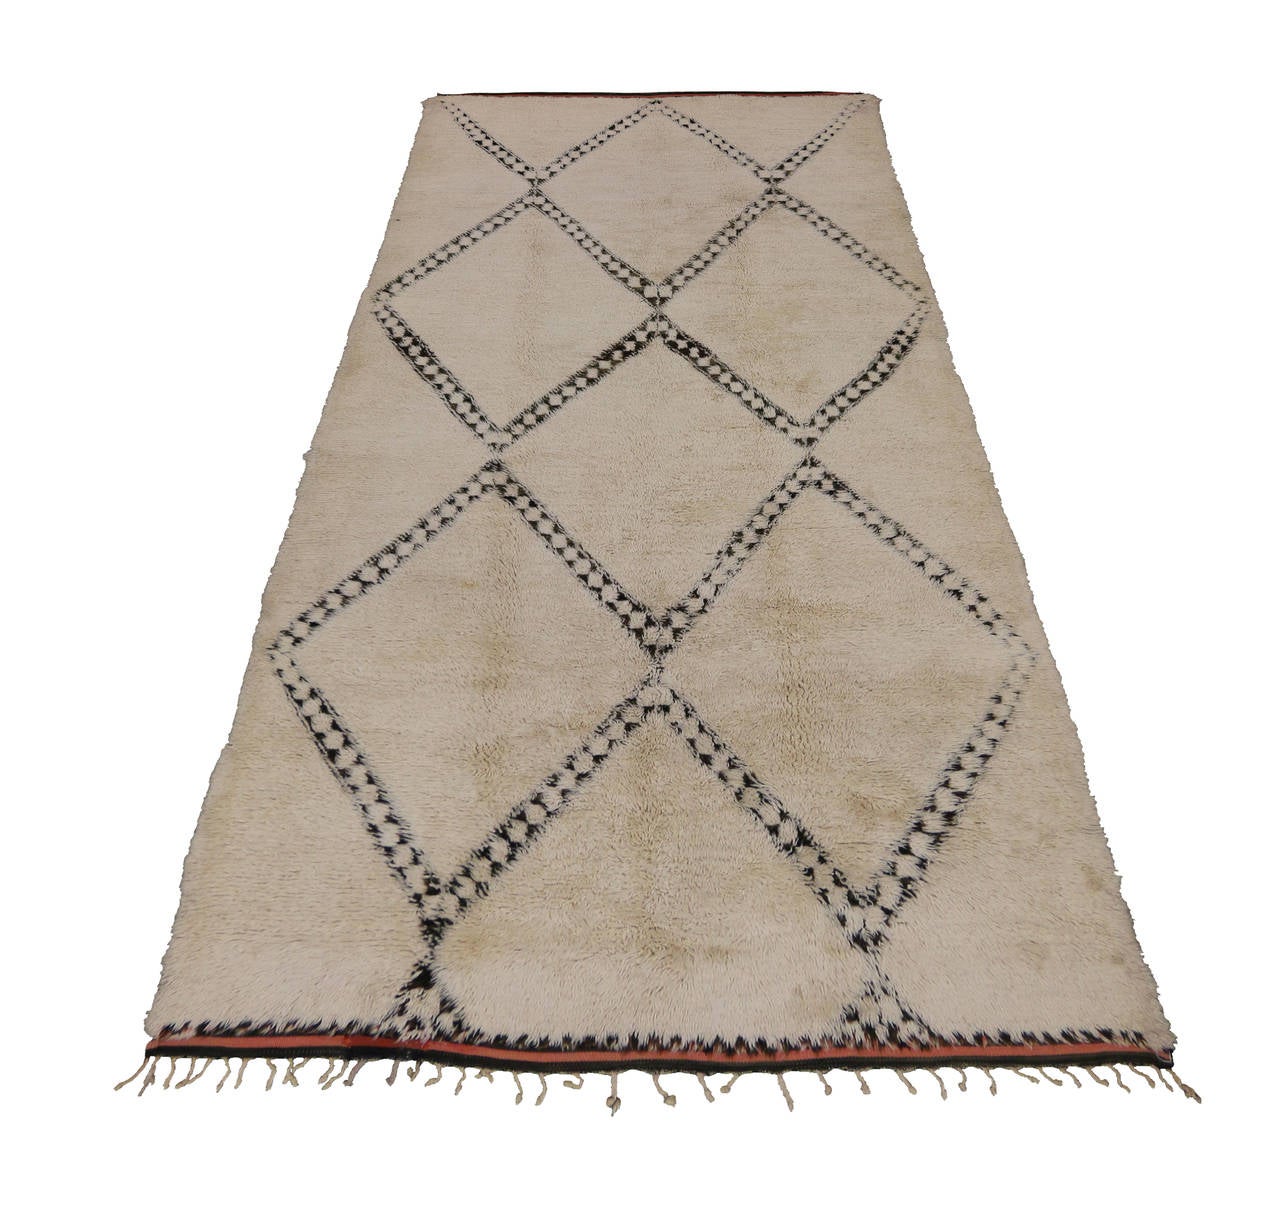 Wool Beni Ouarain Moroccan Rug with Minimalist Design and Mid-Century Modern Style